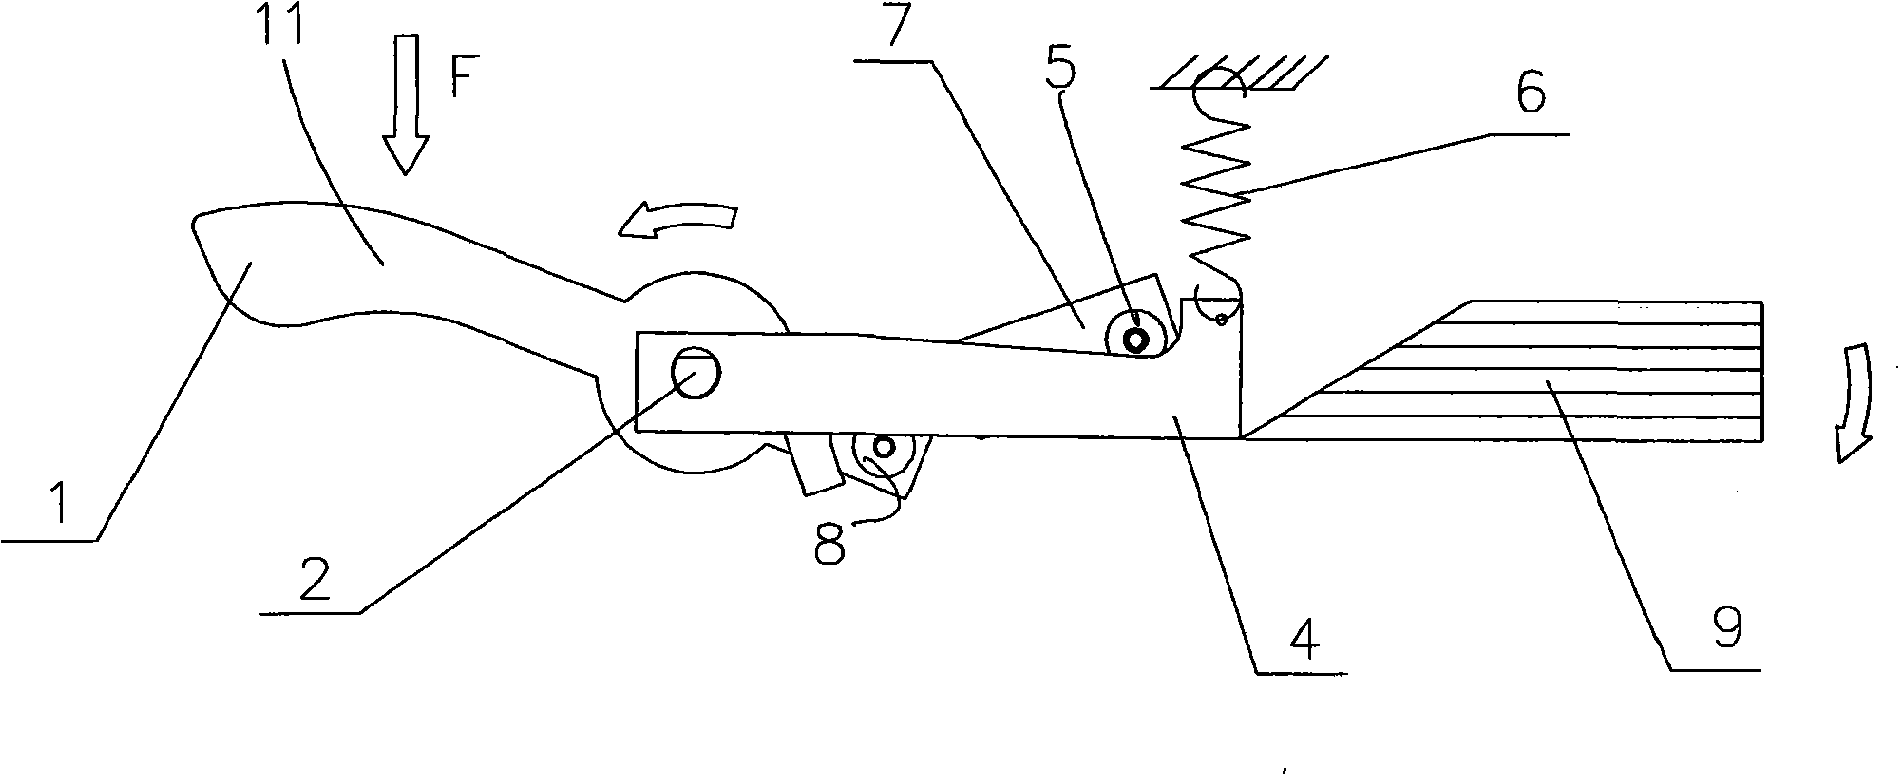 Structure of lever-type paper-bearing dish